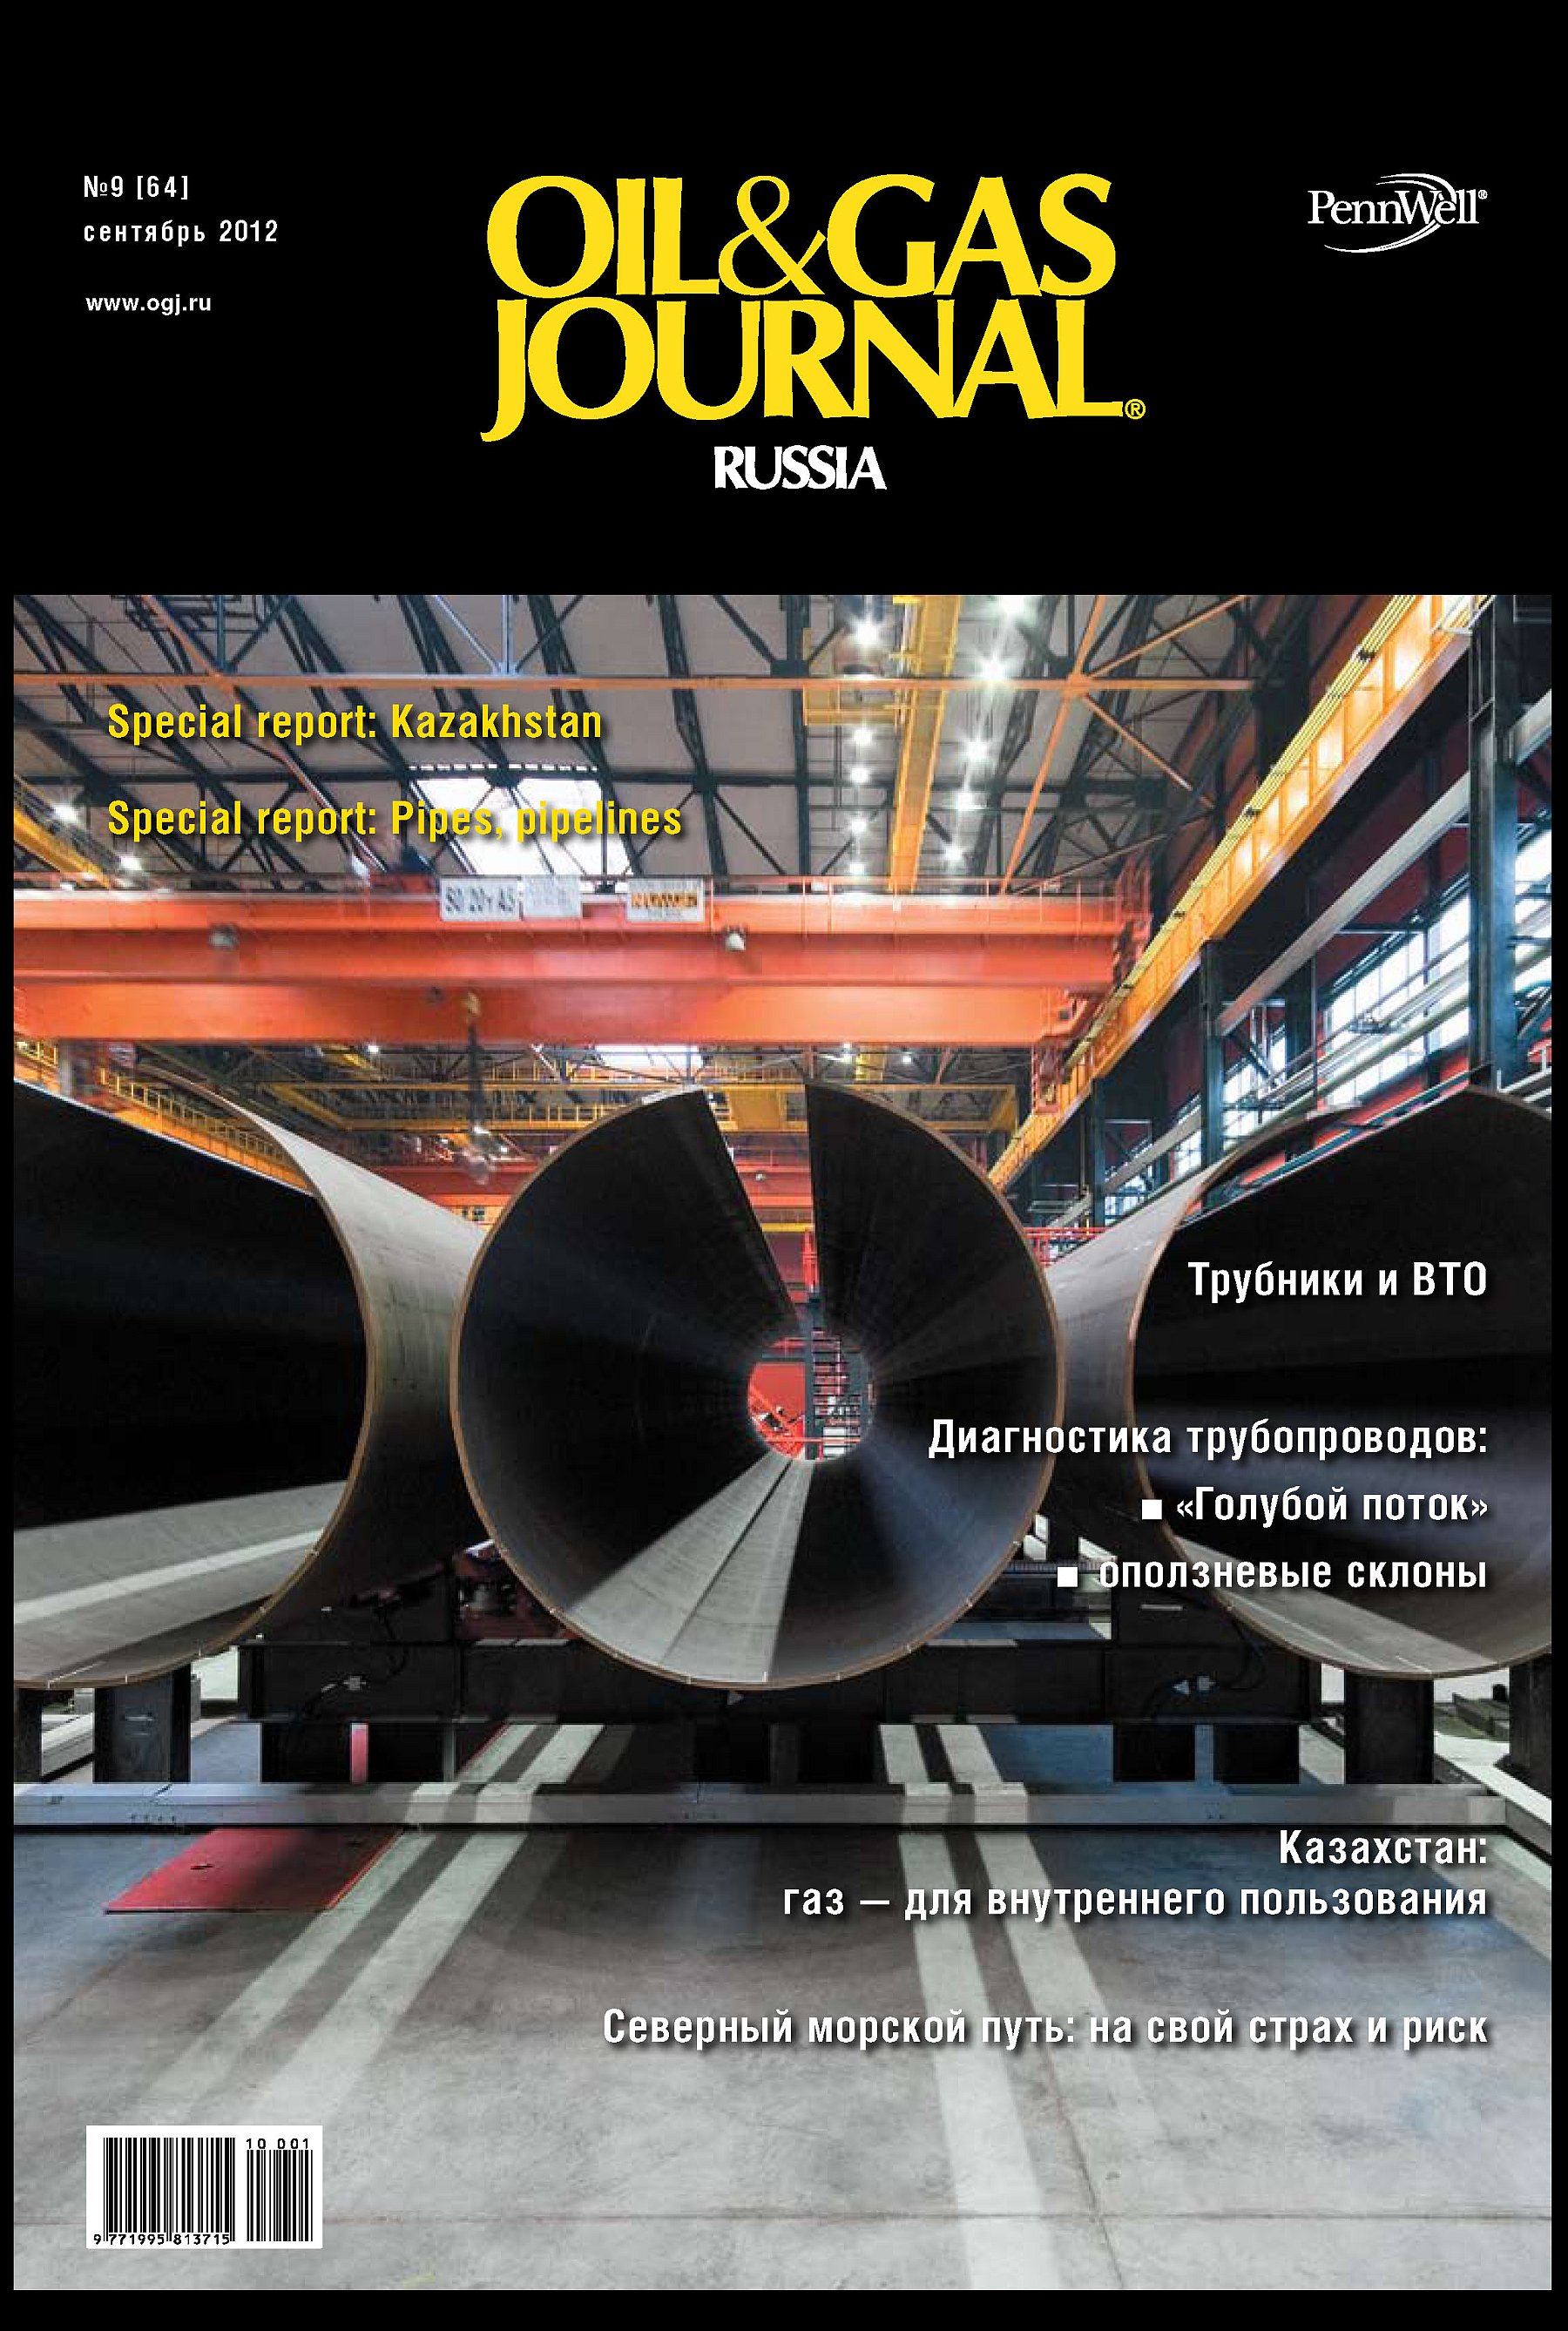 Oil&Gas Journal Russia№9/2012